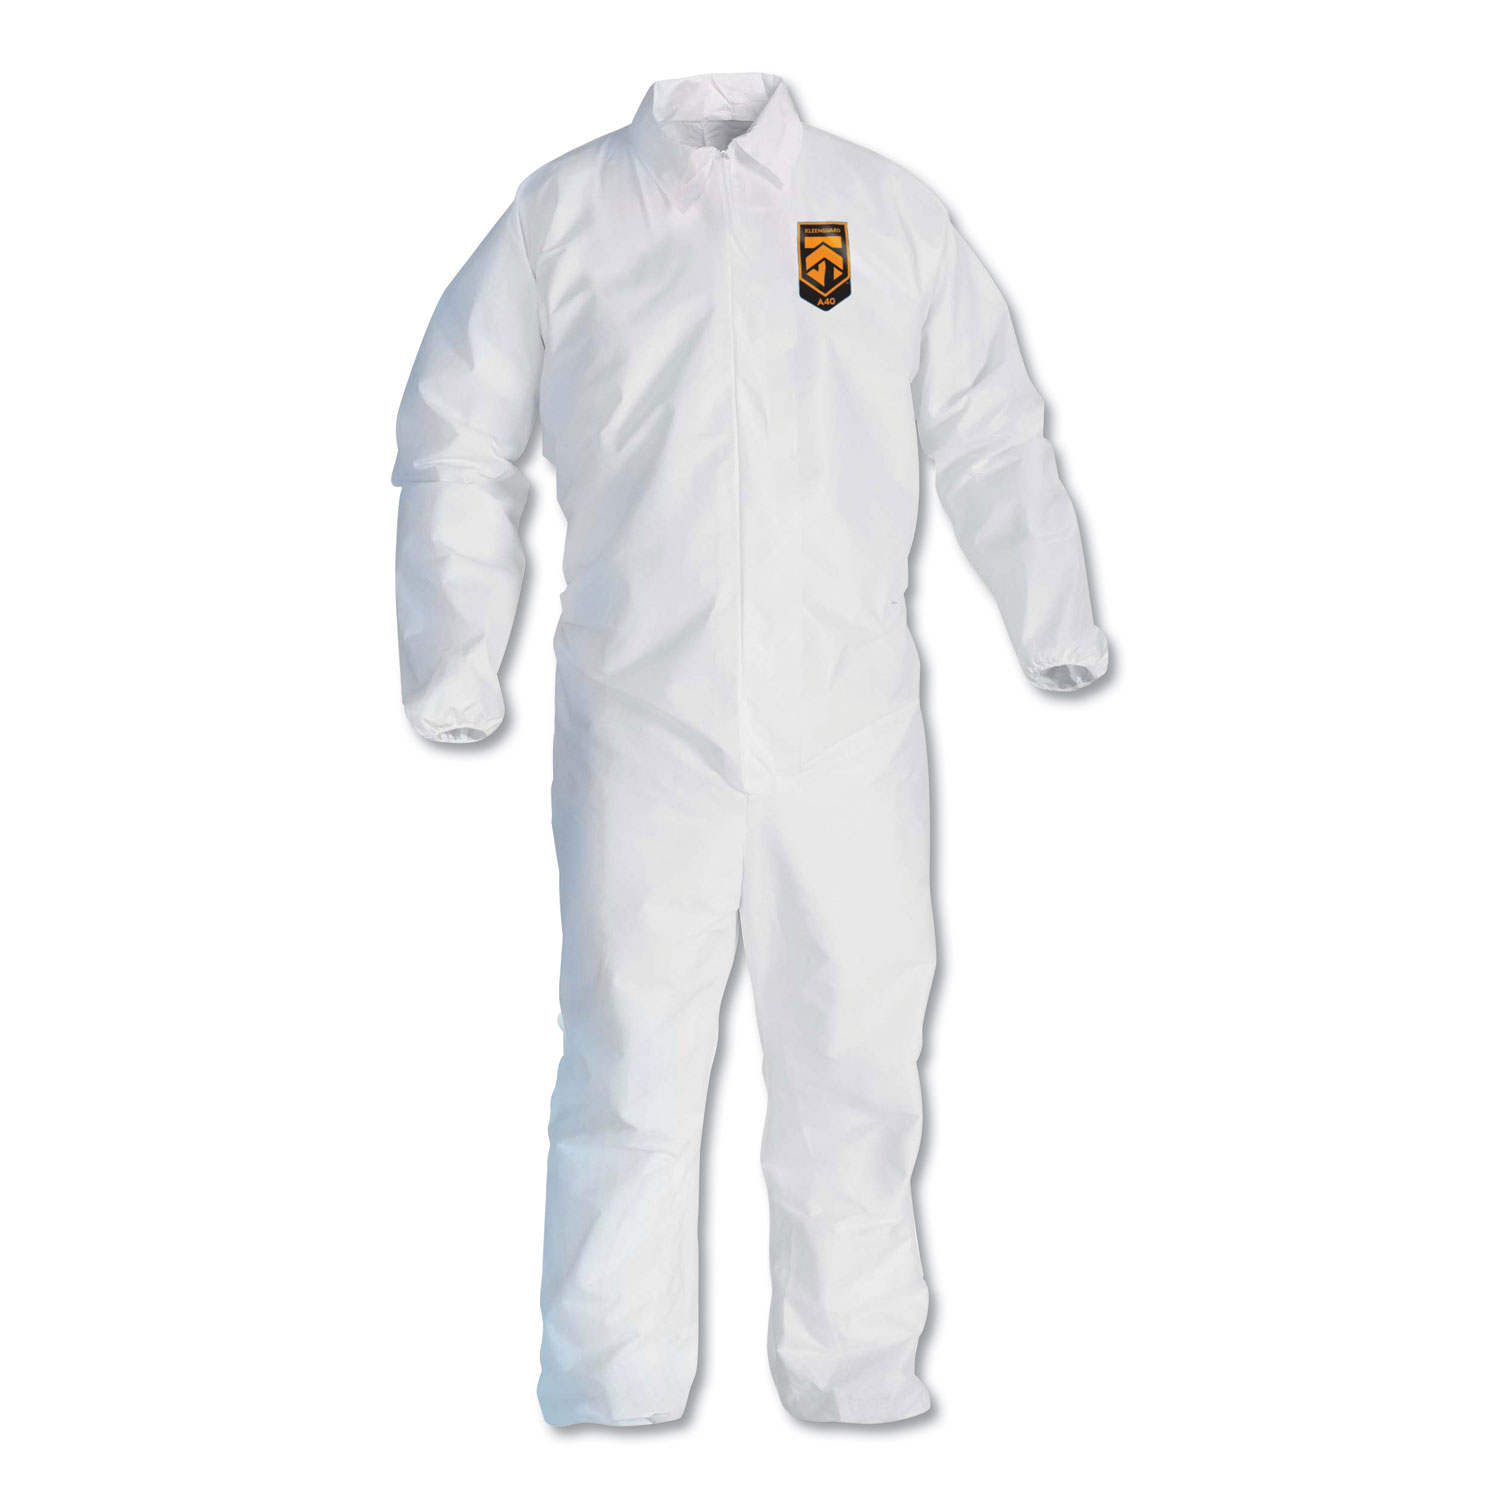  KleenGuard KCC 44316 A40 Elastic-Cuff and Ankles Coveralls, 3X-Large, White, 25/Carton (KCC44316) 